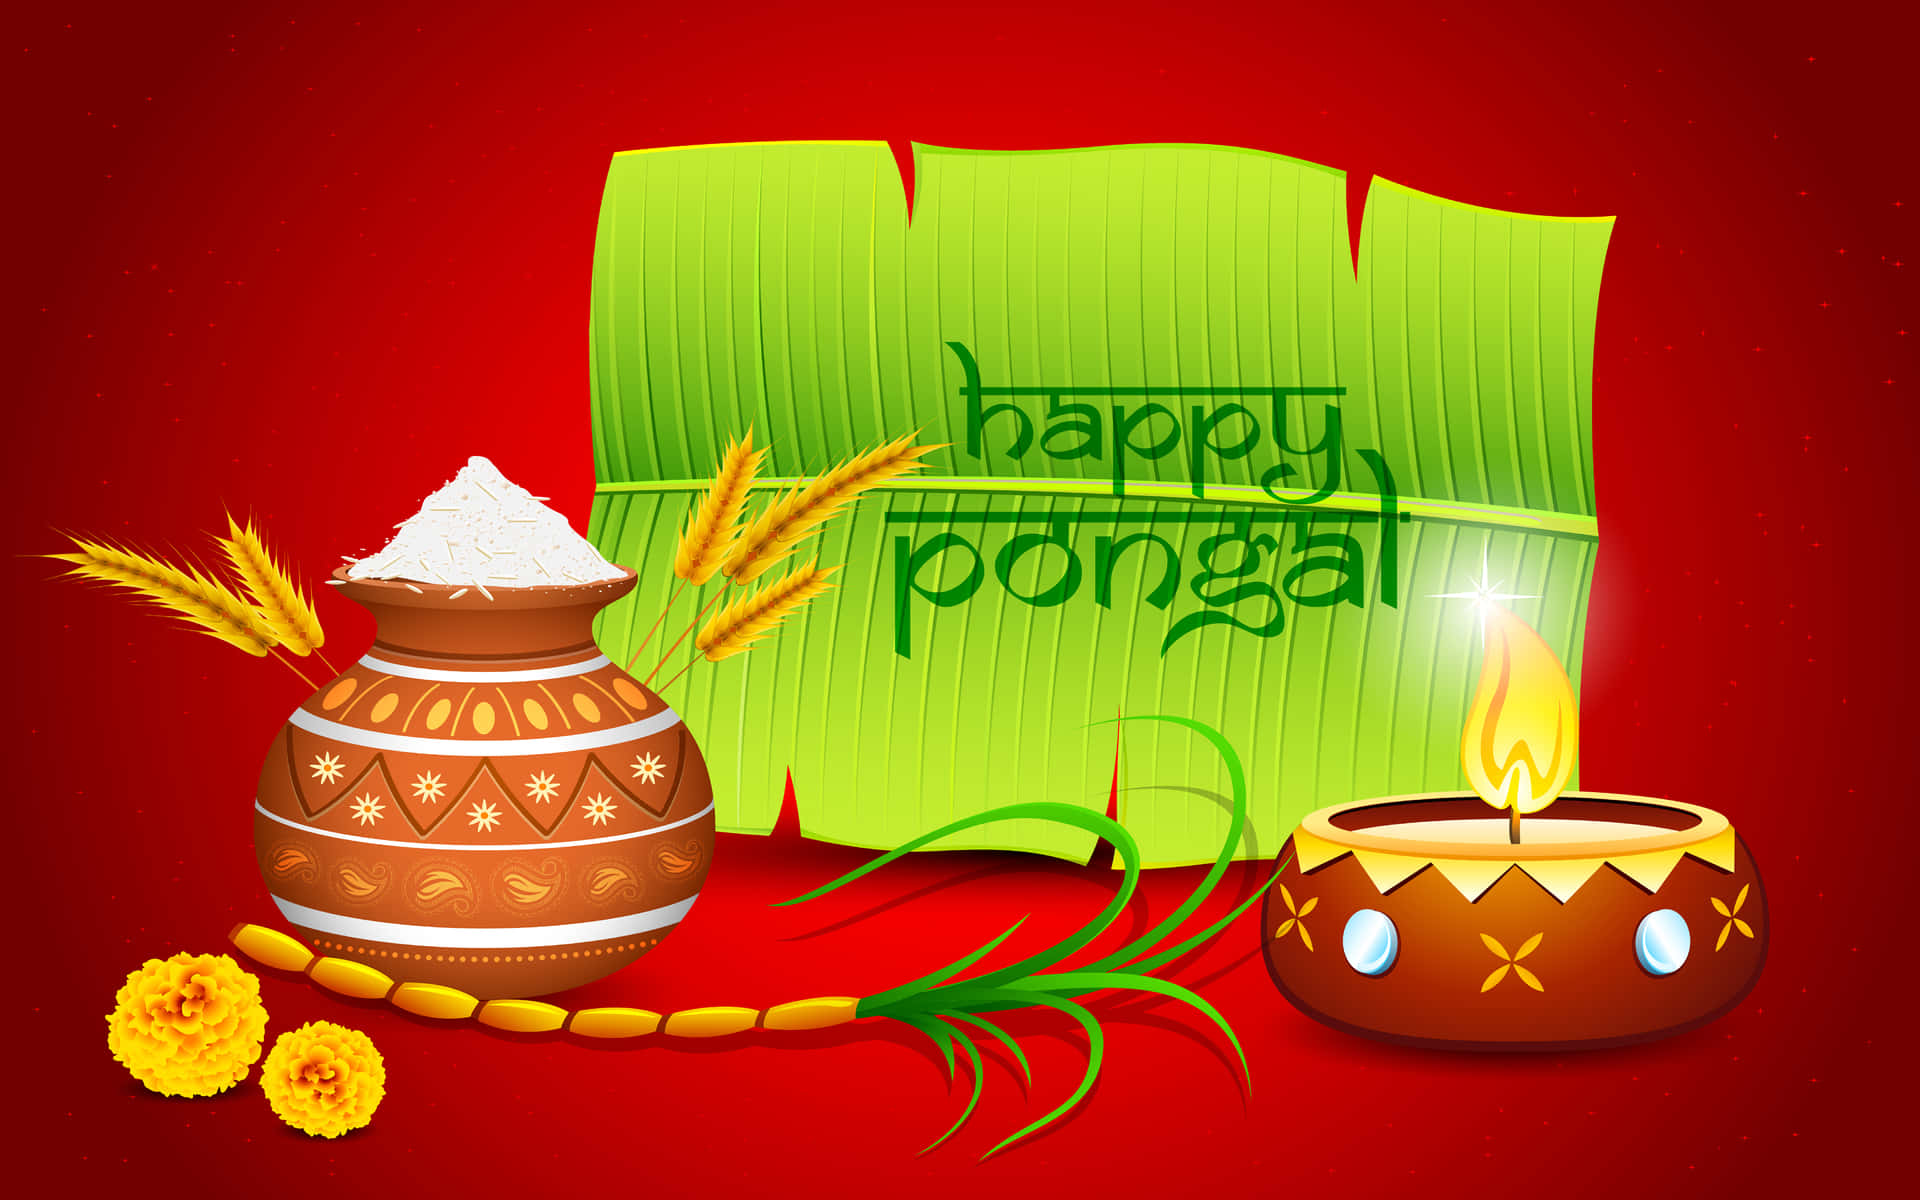 Celebrate Pongal with Colours, Joy and Sweetness